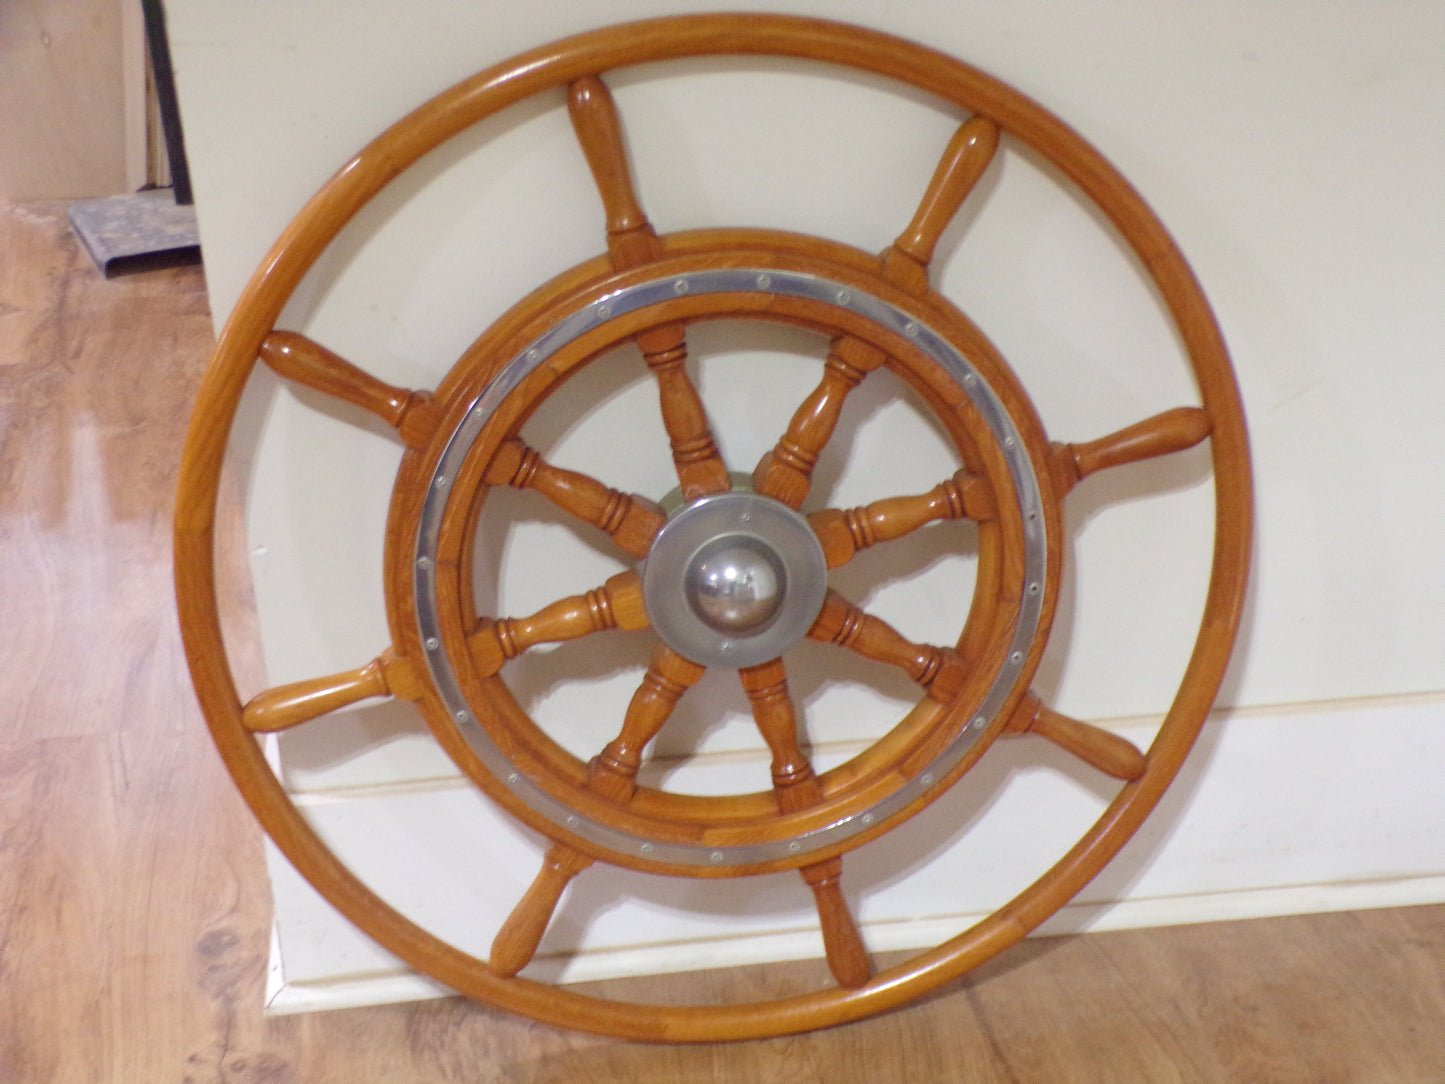 Authentic Ship Wheel, 31 1/2" Wooden Spokes, Solid Brass Hub, circa late 1800s